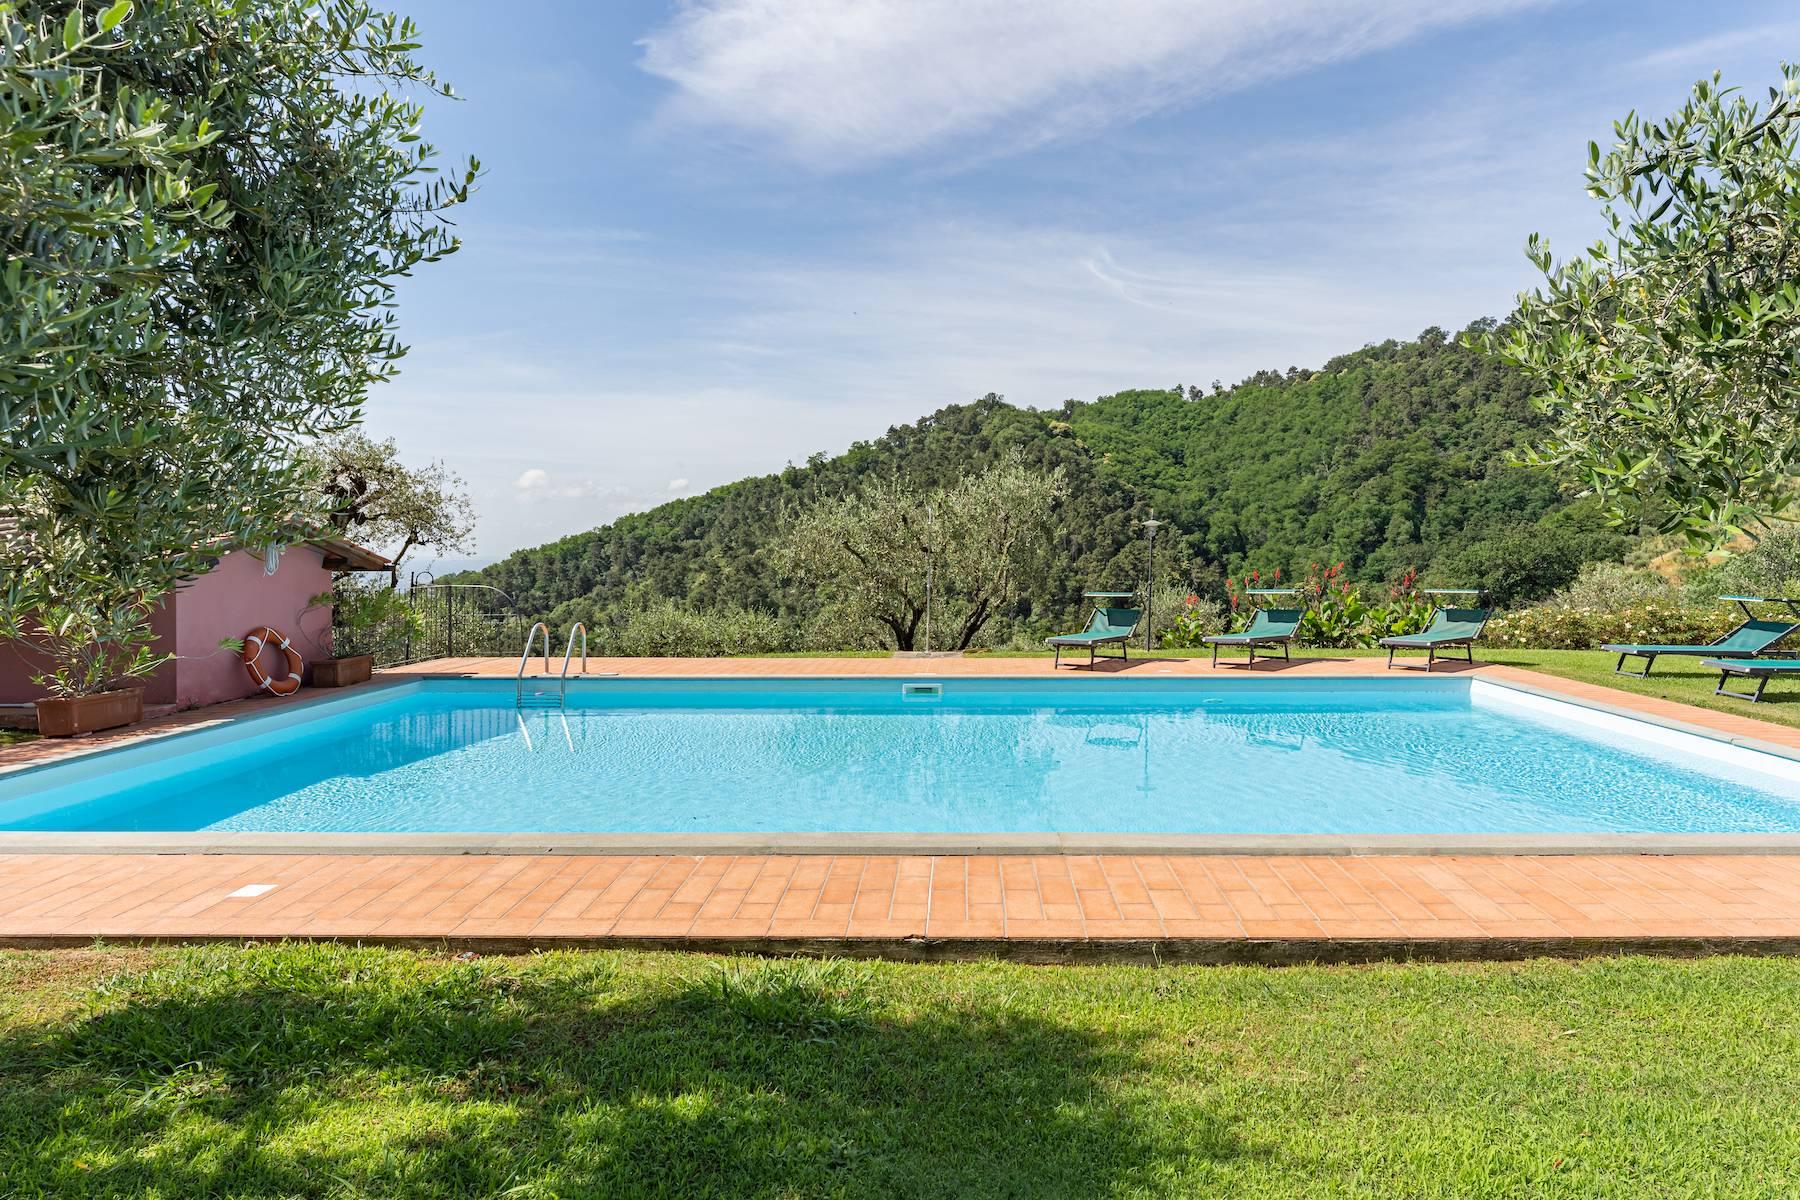 Luxury country house on the Tuscan hills - 4